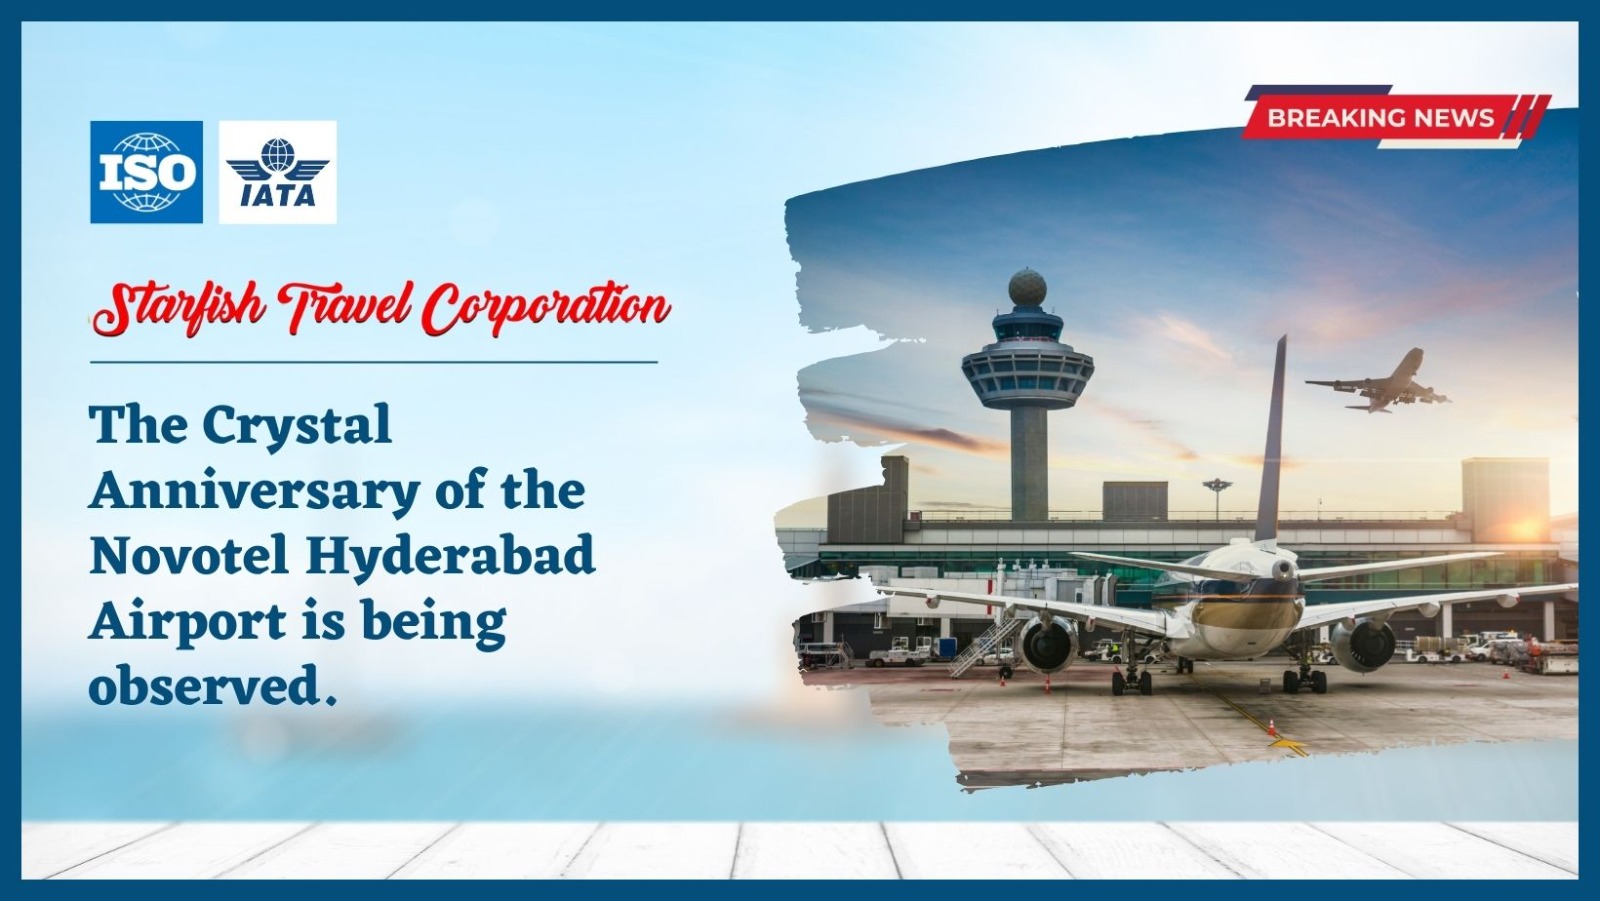 The Crystal Anniversary of the Novotel Hyderabad Airport is being observed.